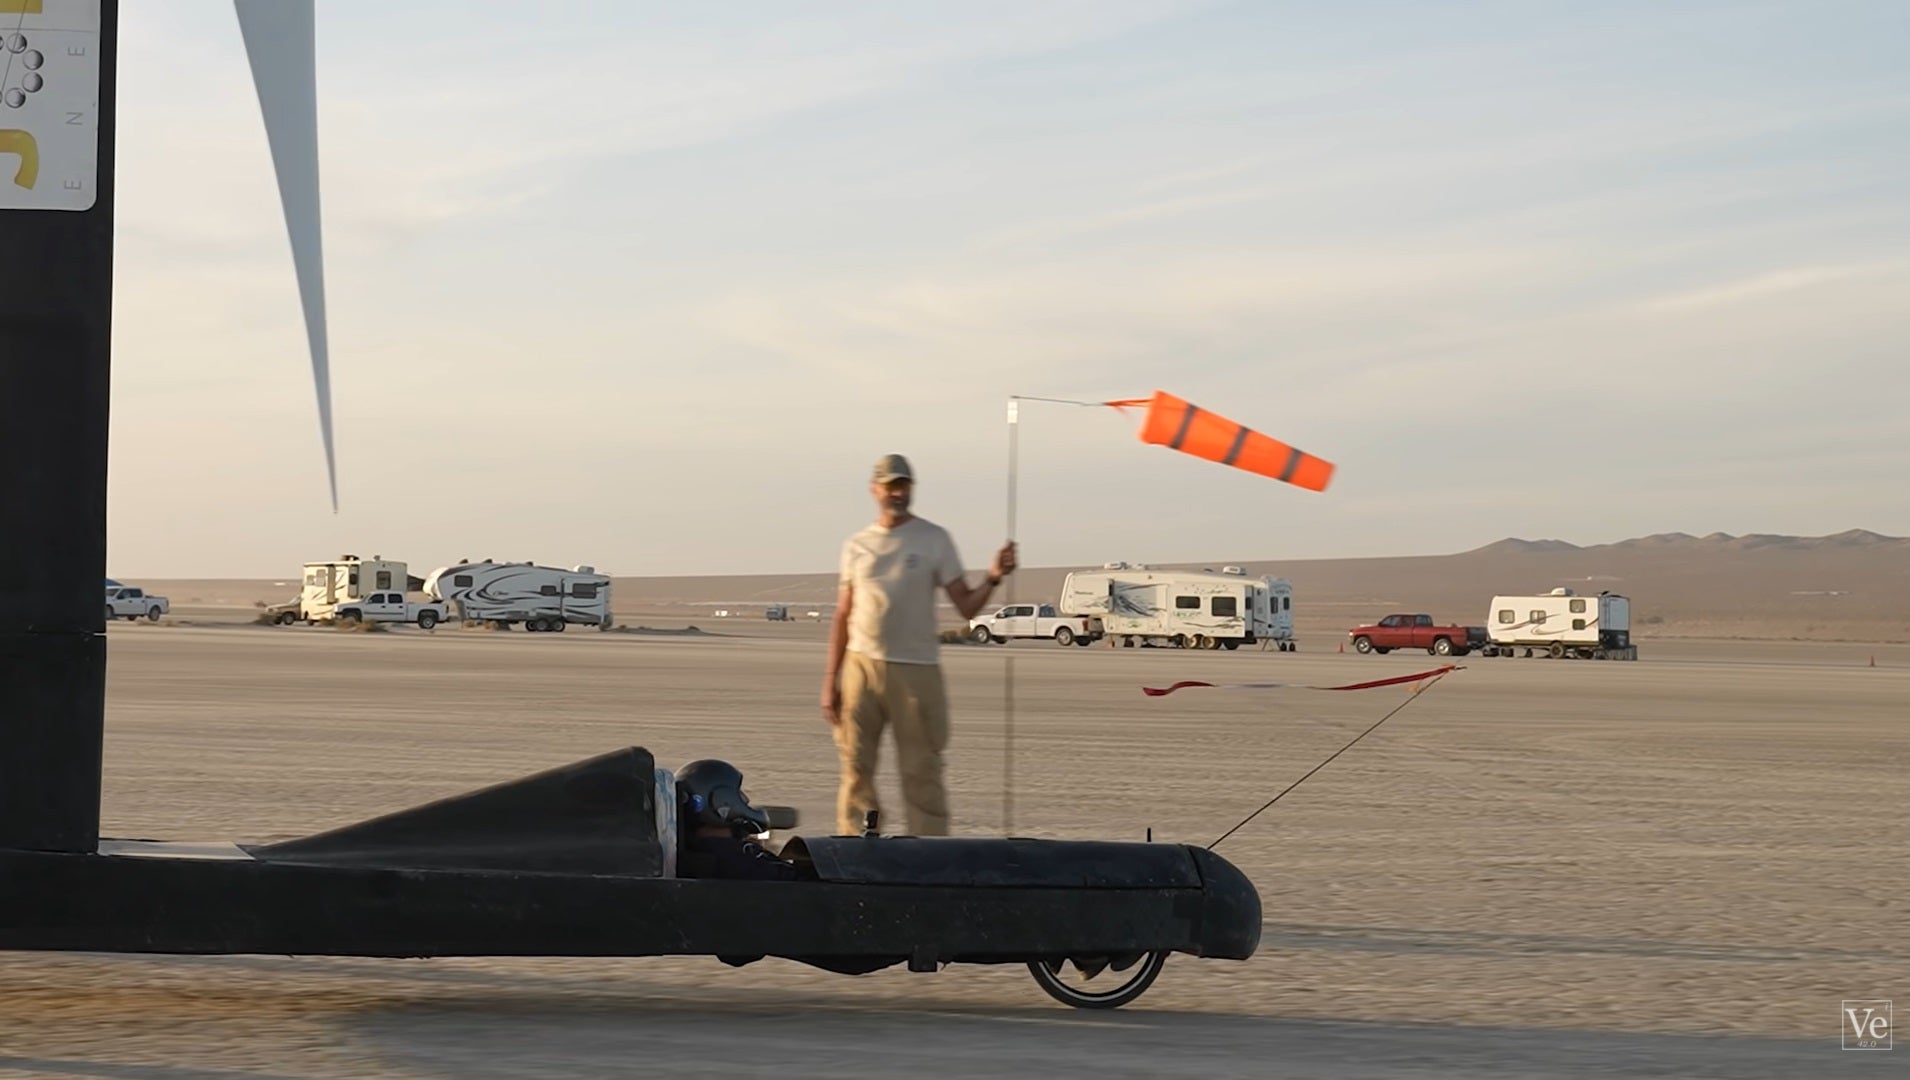 This Wind-Powered Car Goes Fast Enough To Break Physics